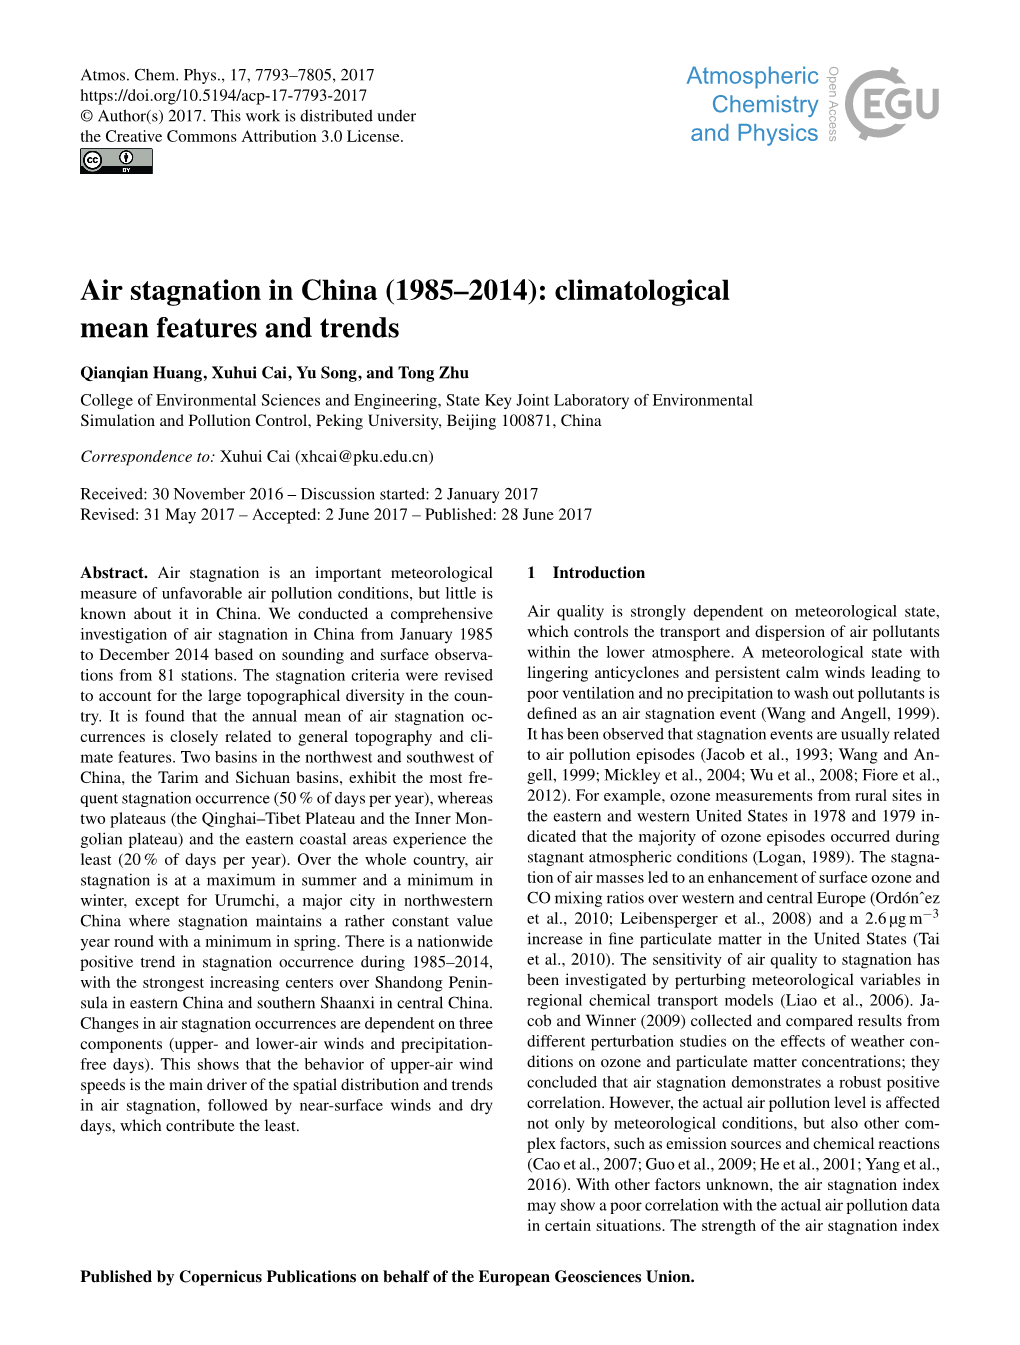 Air Stagnation in China (1985–2014): Climatological Mean Features and Trends